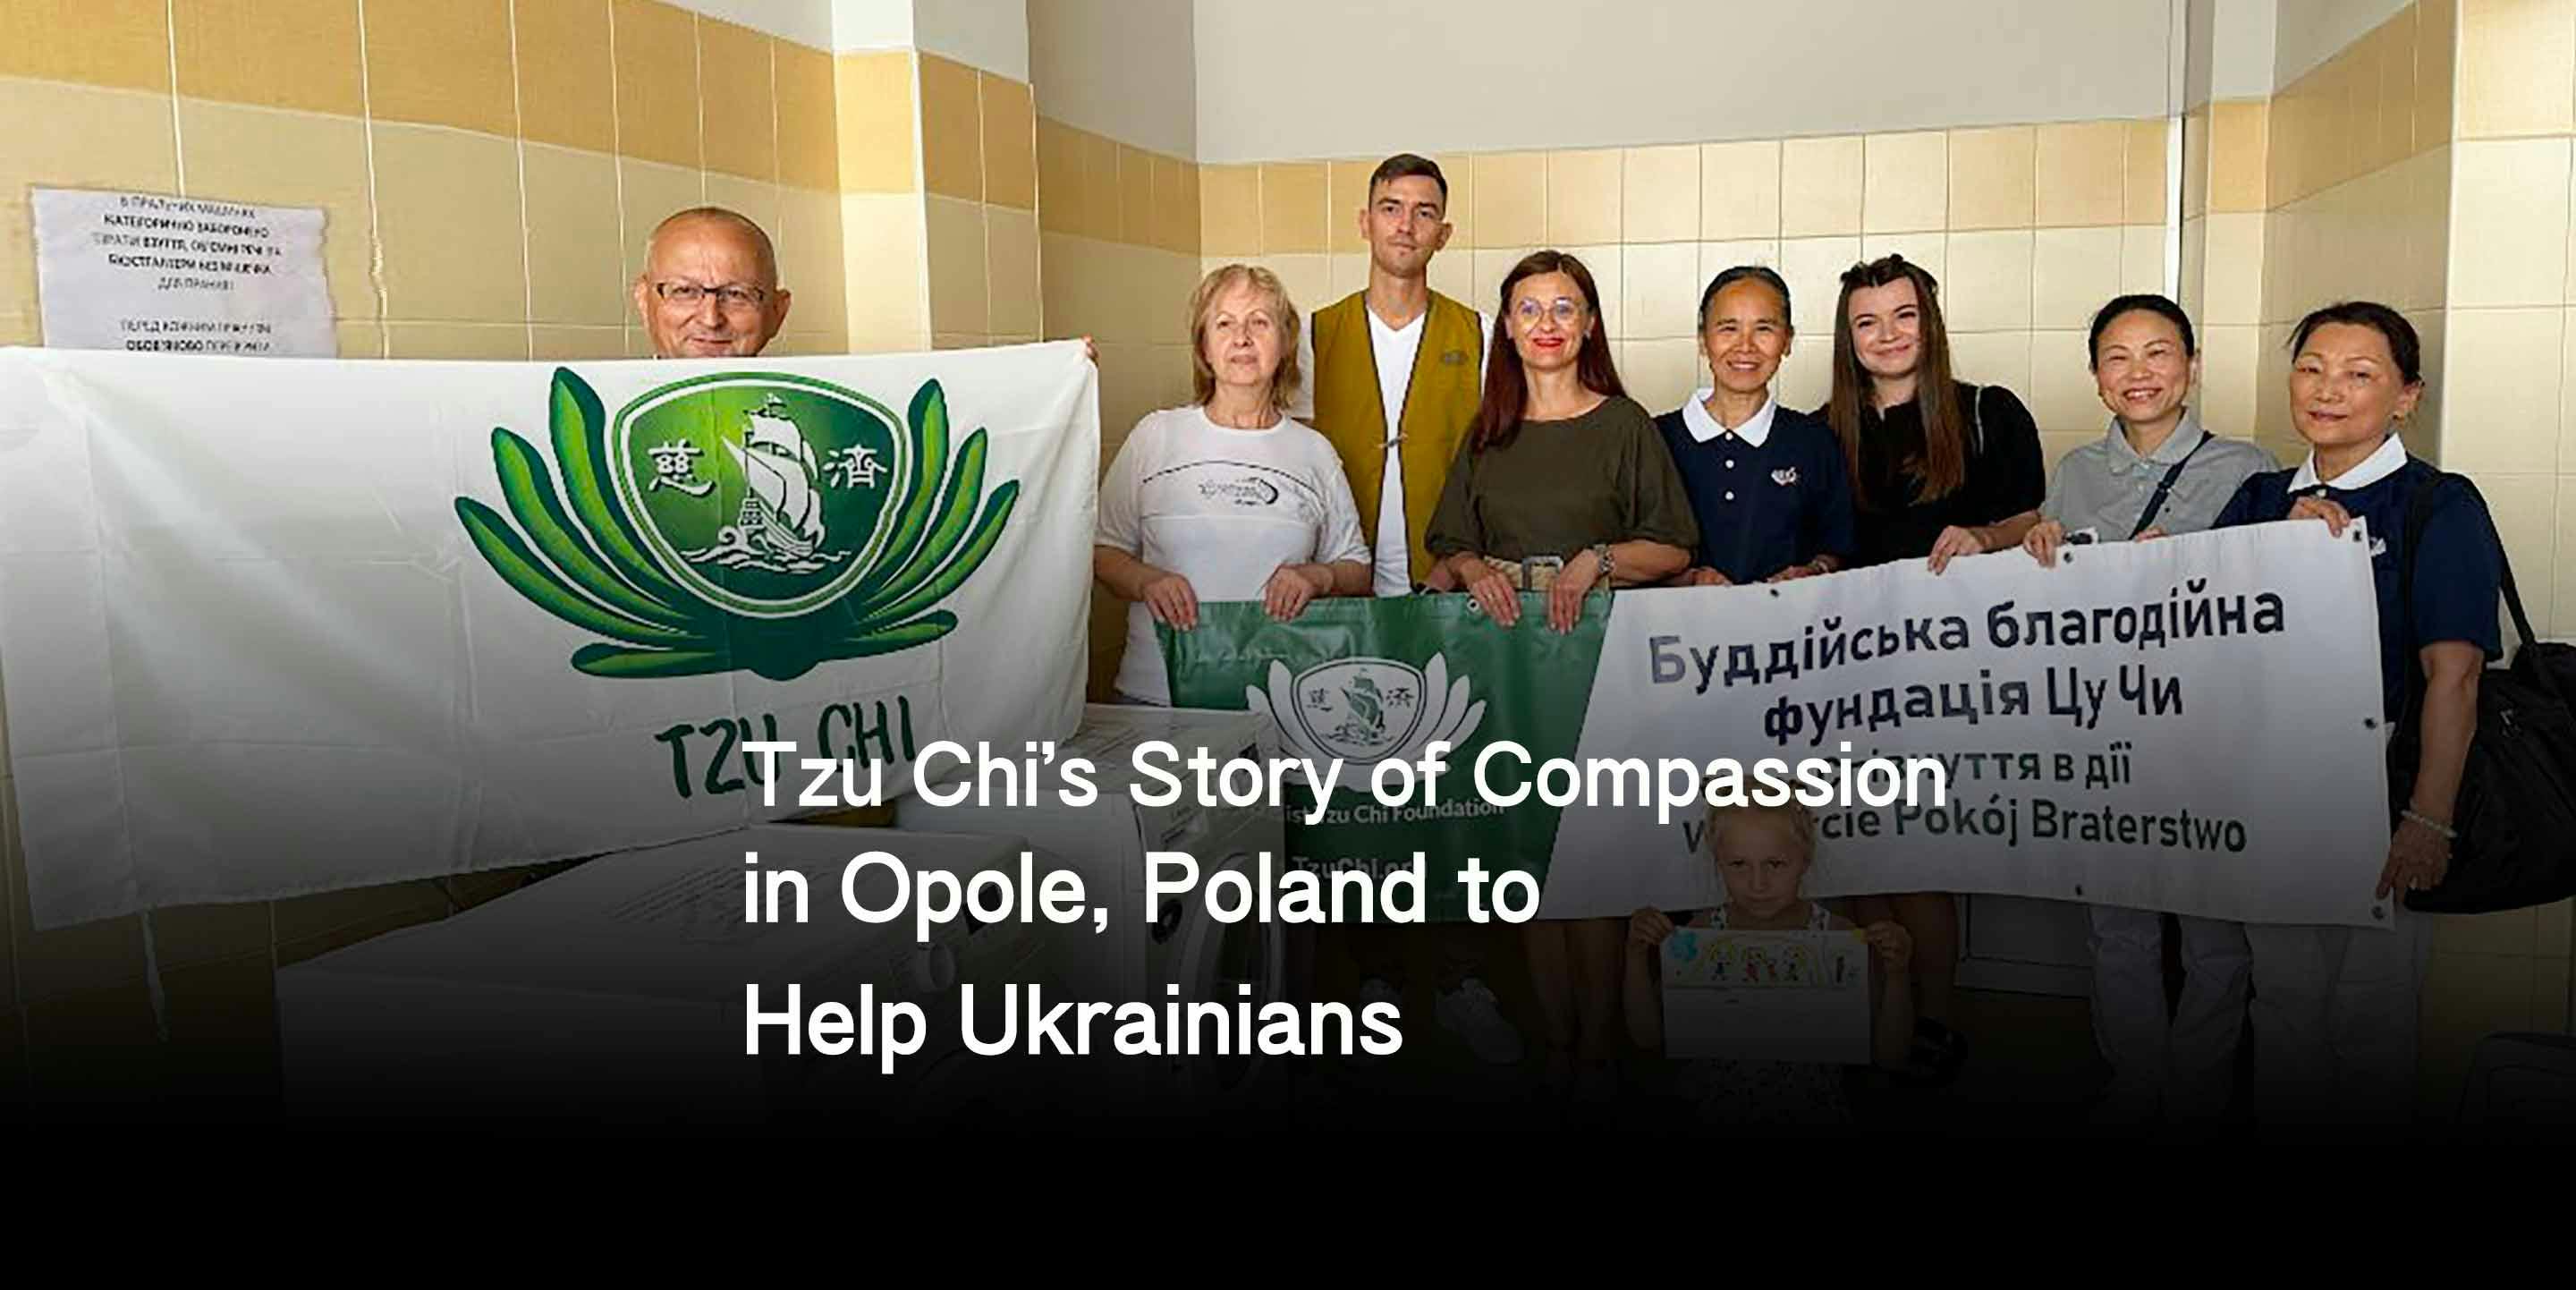 Tzu Chi's Story of Compassion in Opole, Poland to Help Ukrainians